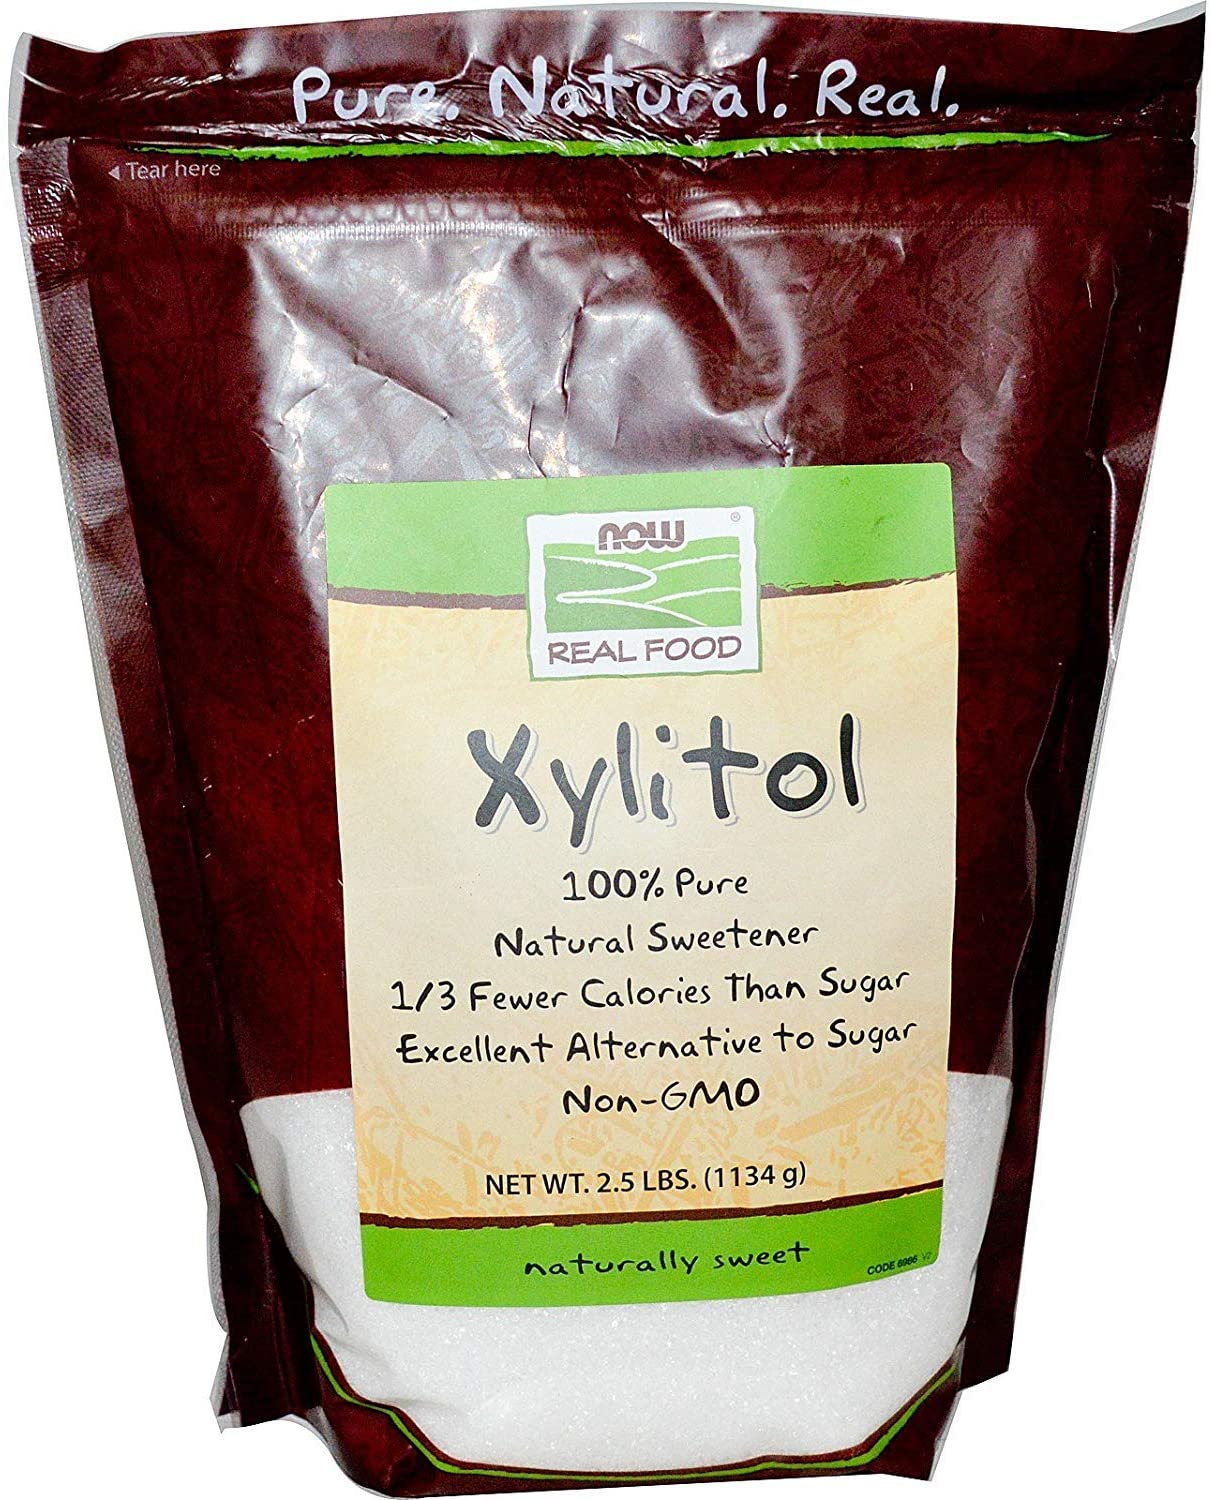 On Xylitol